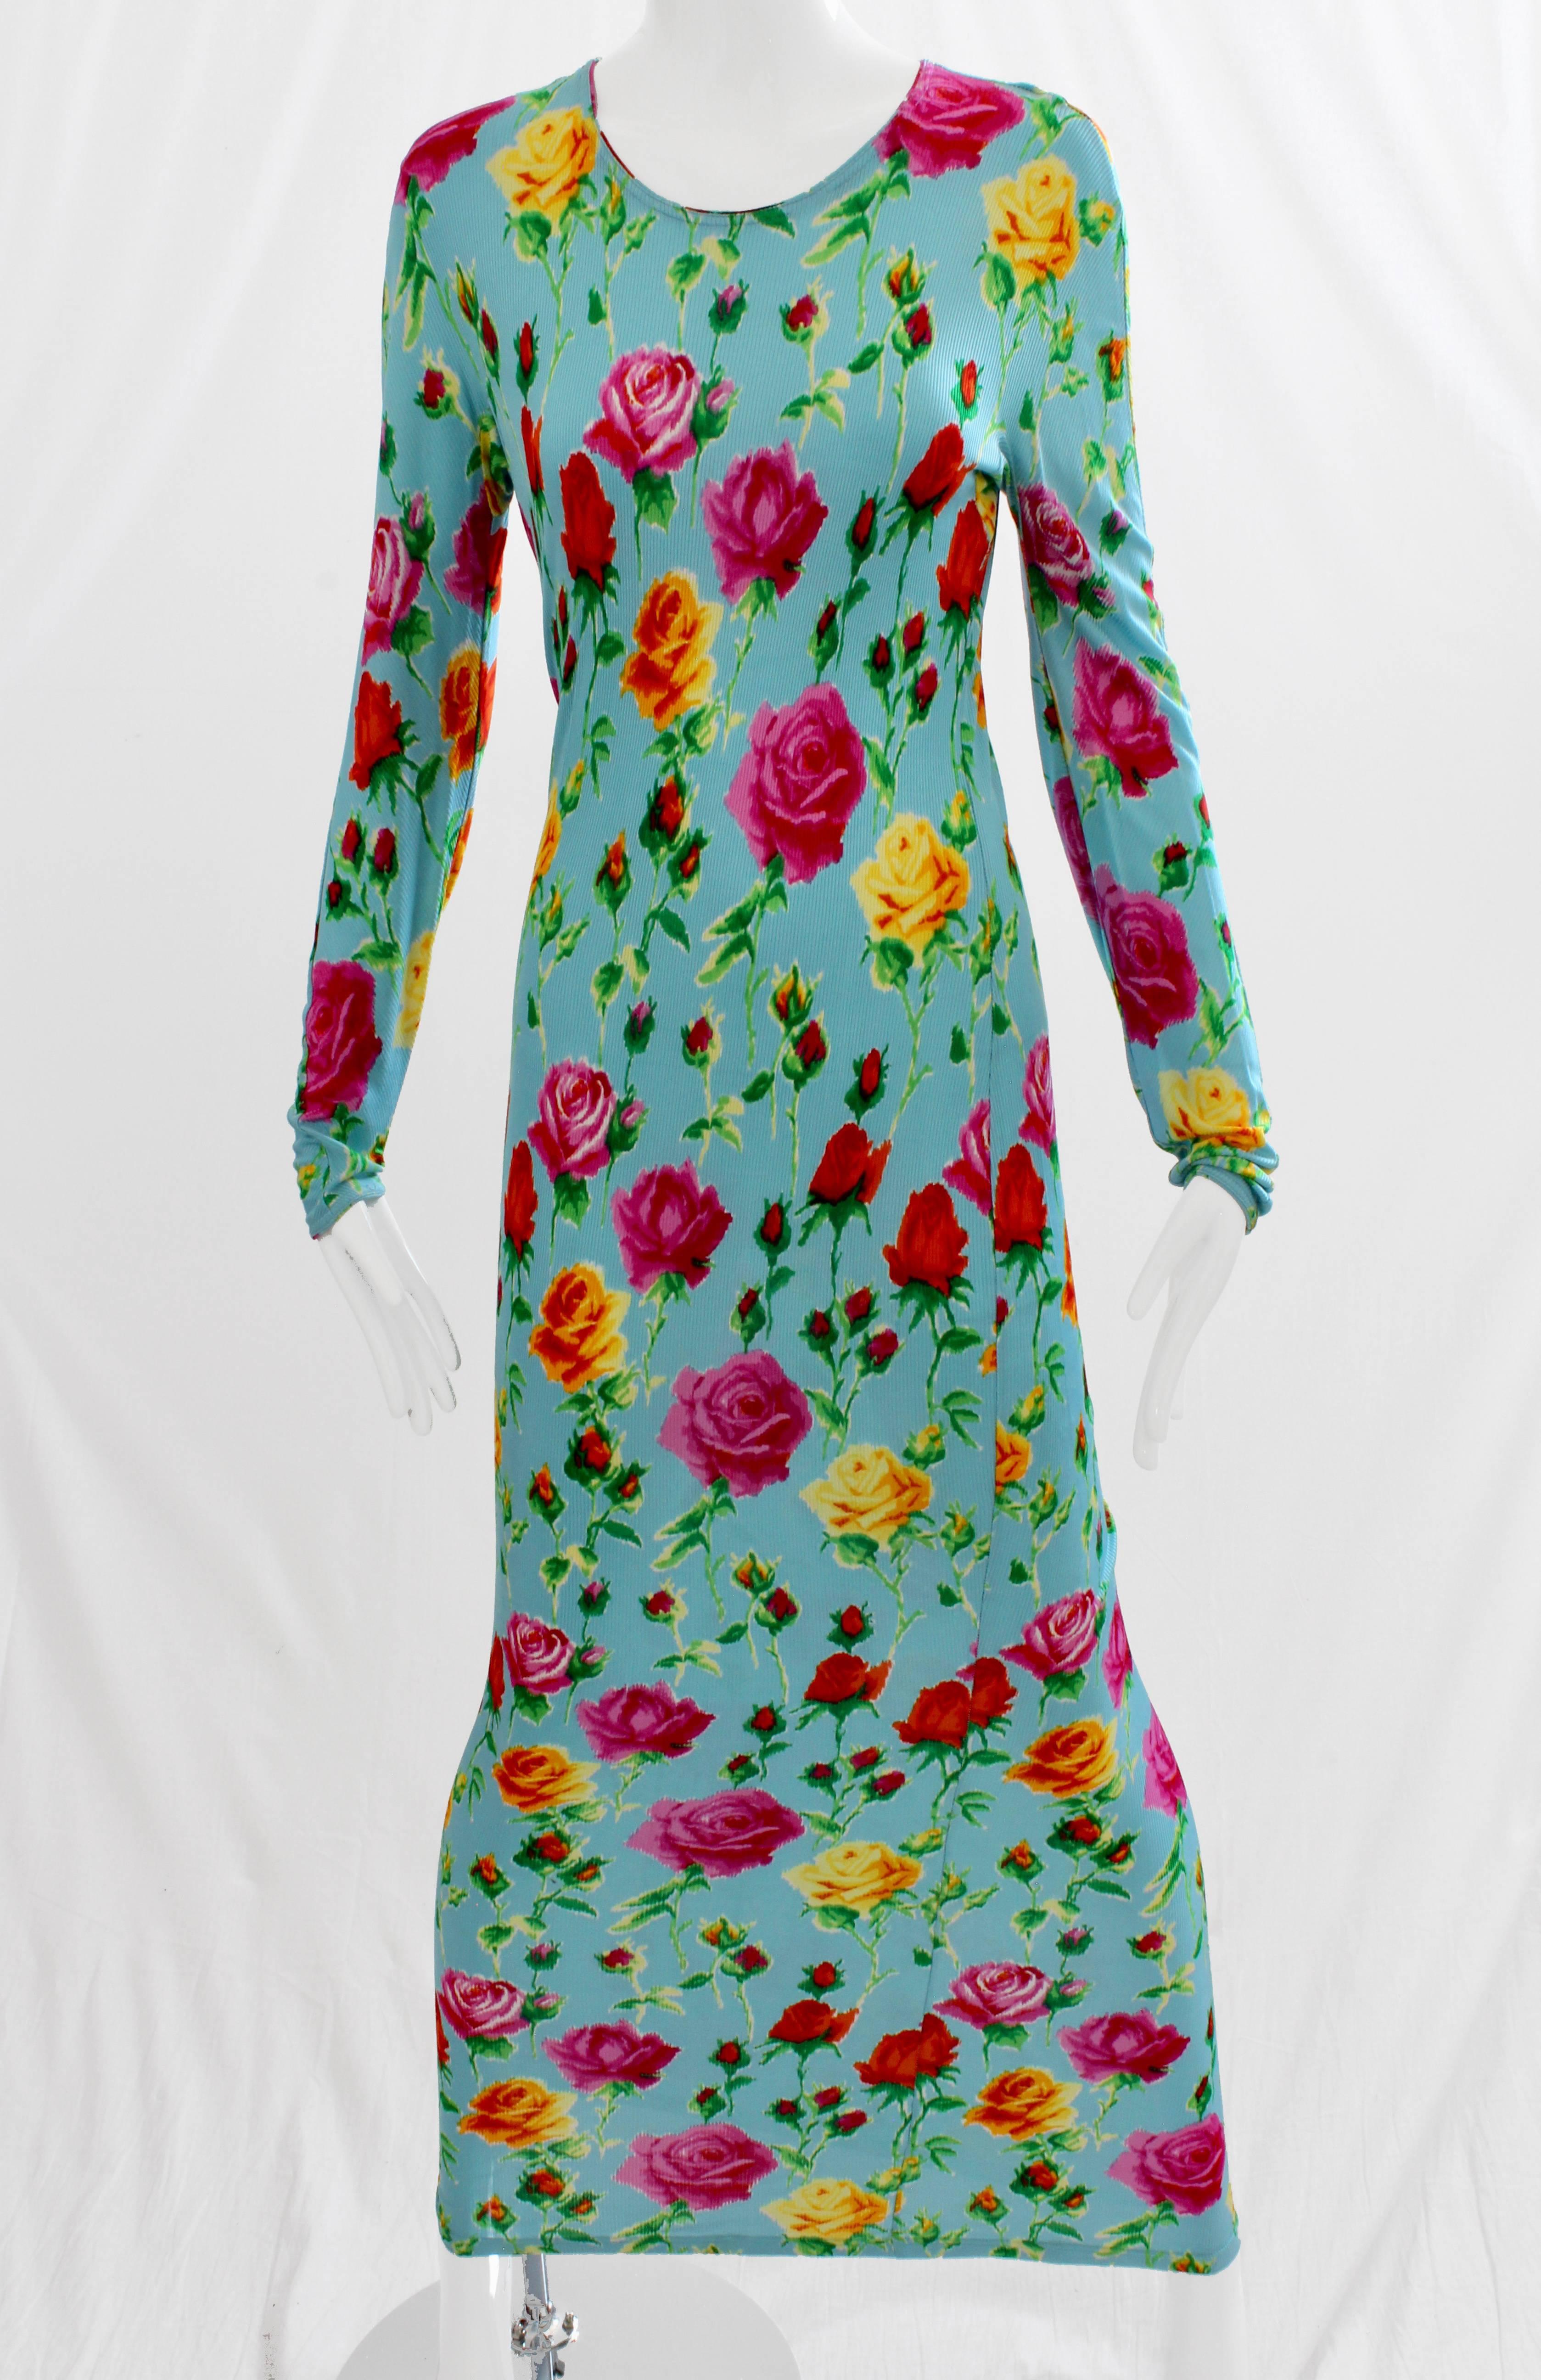 This floral print dress appears in catalog 28 GIANNI VERSACE Collezione Donna Primavera Estate 1995. In excellent condition for its age, with no issues to report. Fastens with rear zip and hook/eye closure and is unlined. No size tag but we're